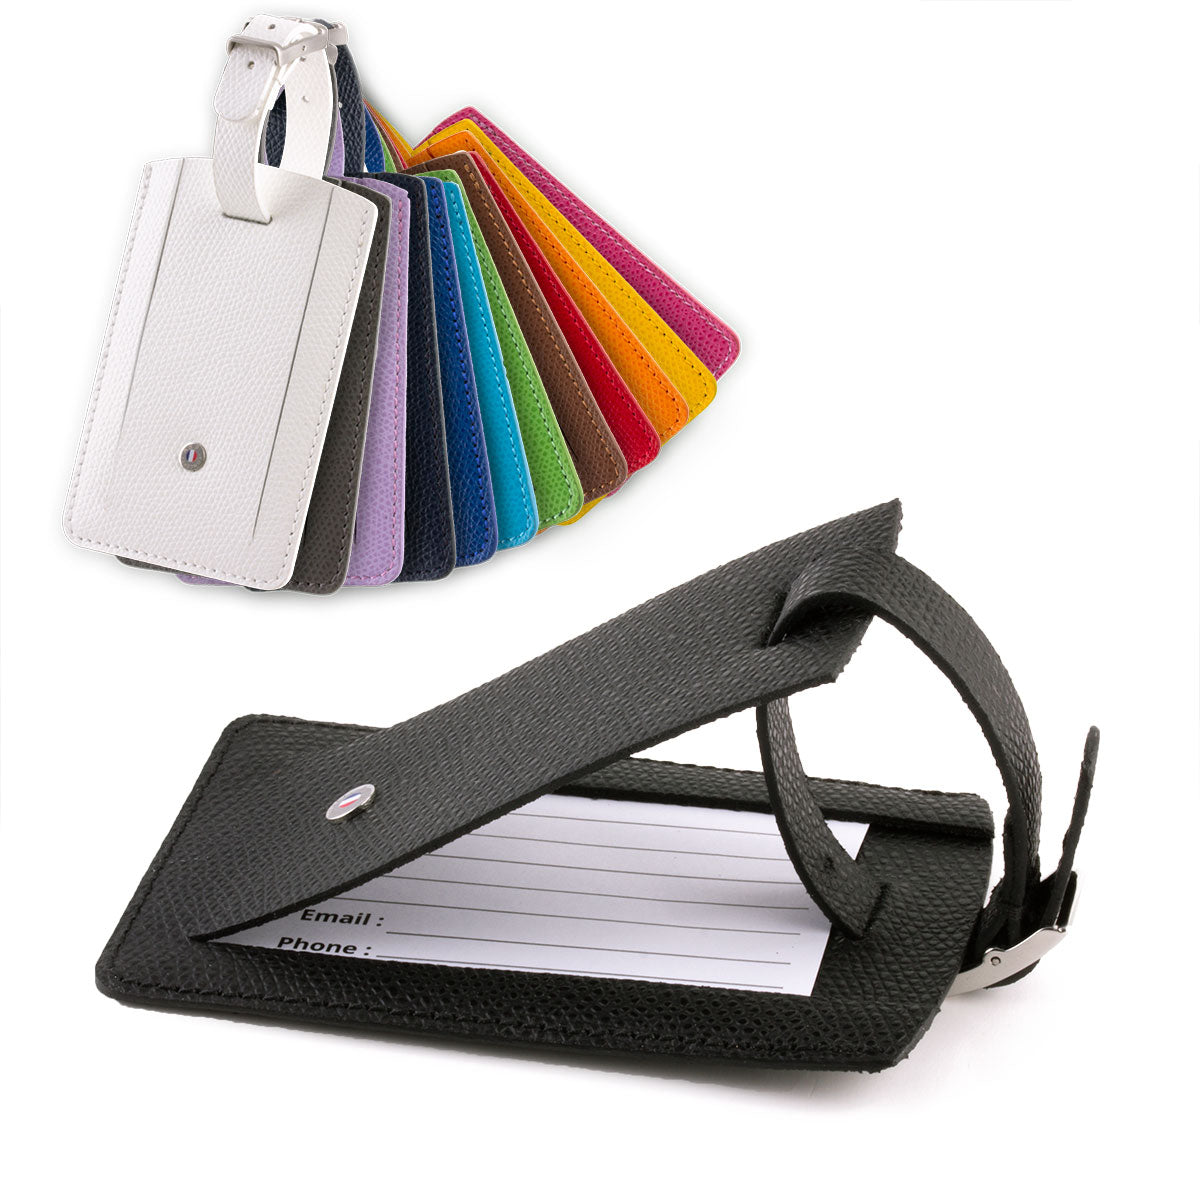 Leather luggage Tag "Essential" - Grained calf (black, blue, green, brown, orange...)